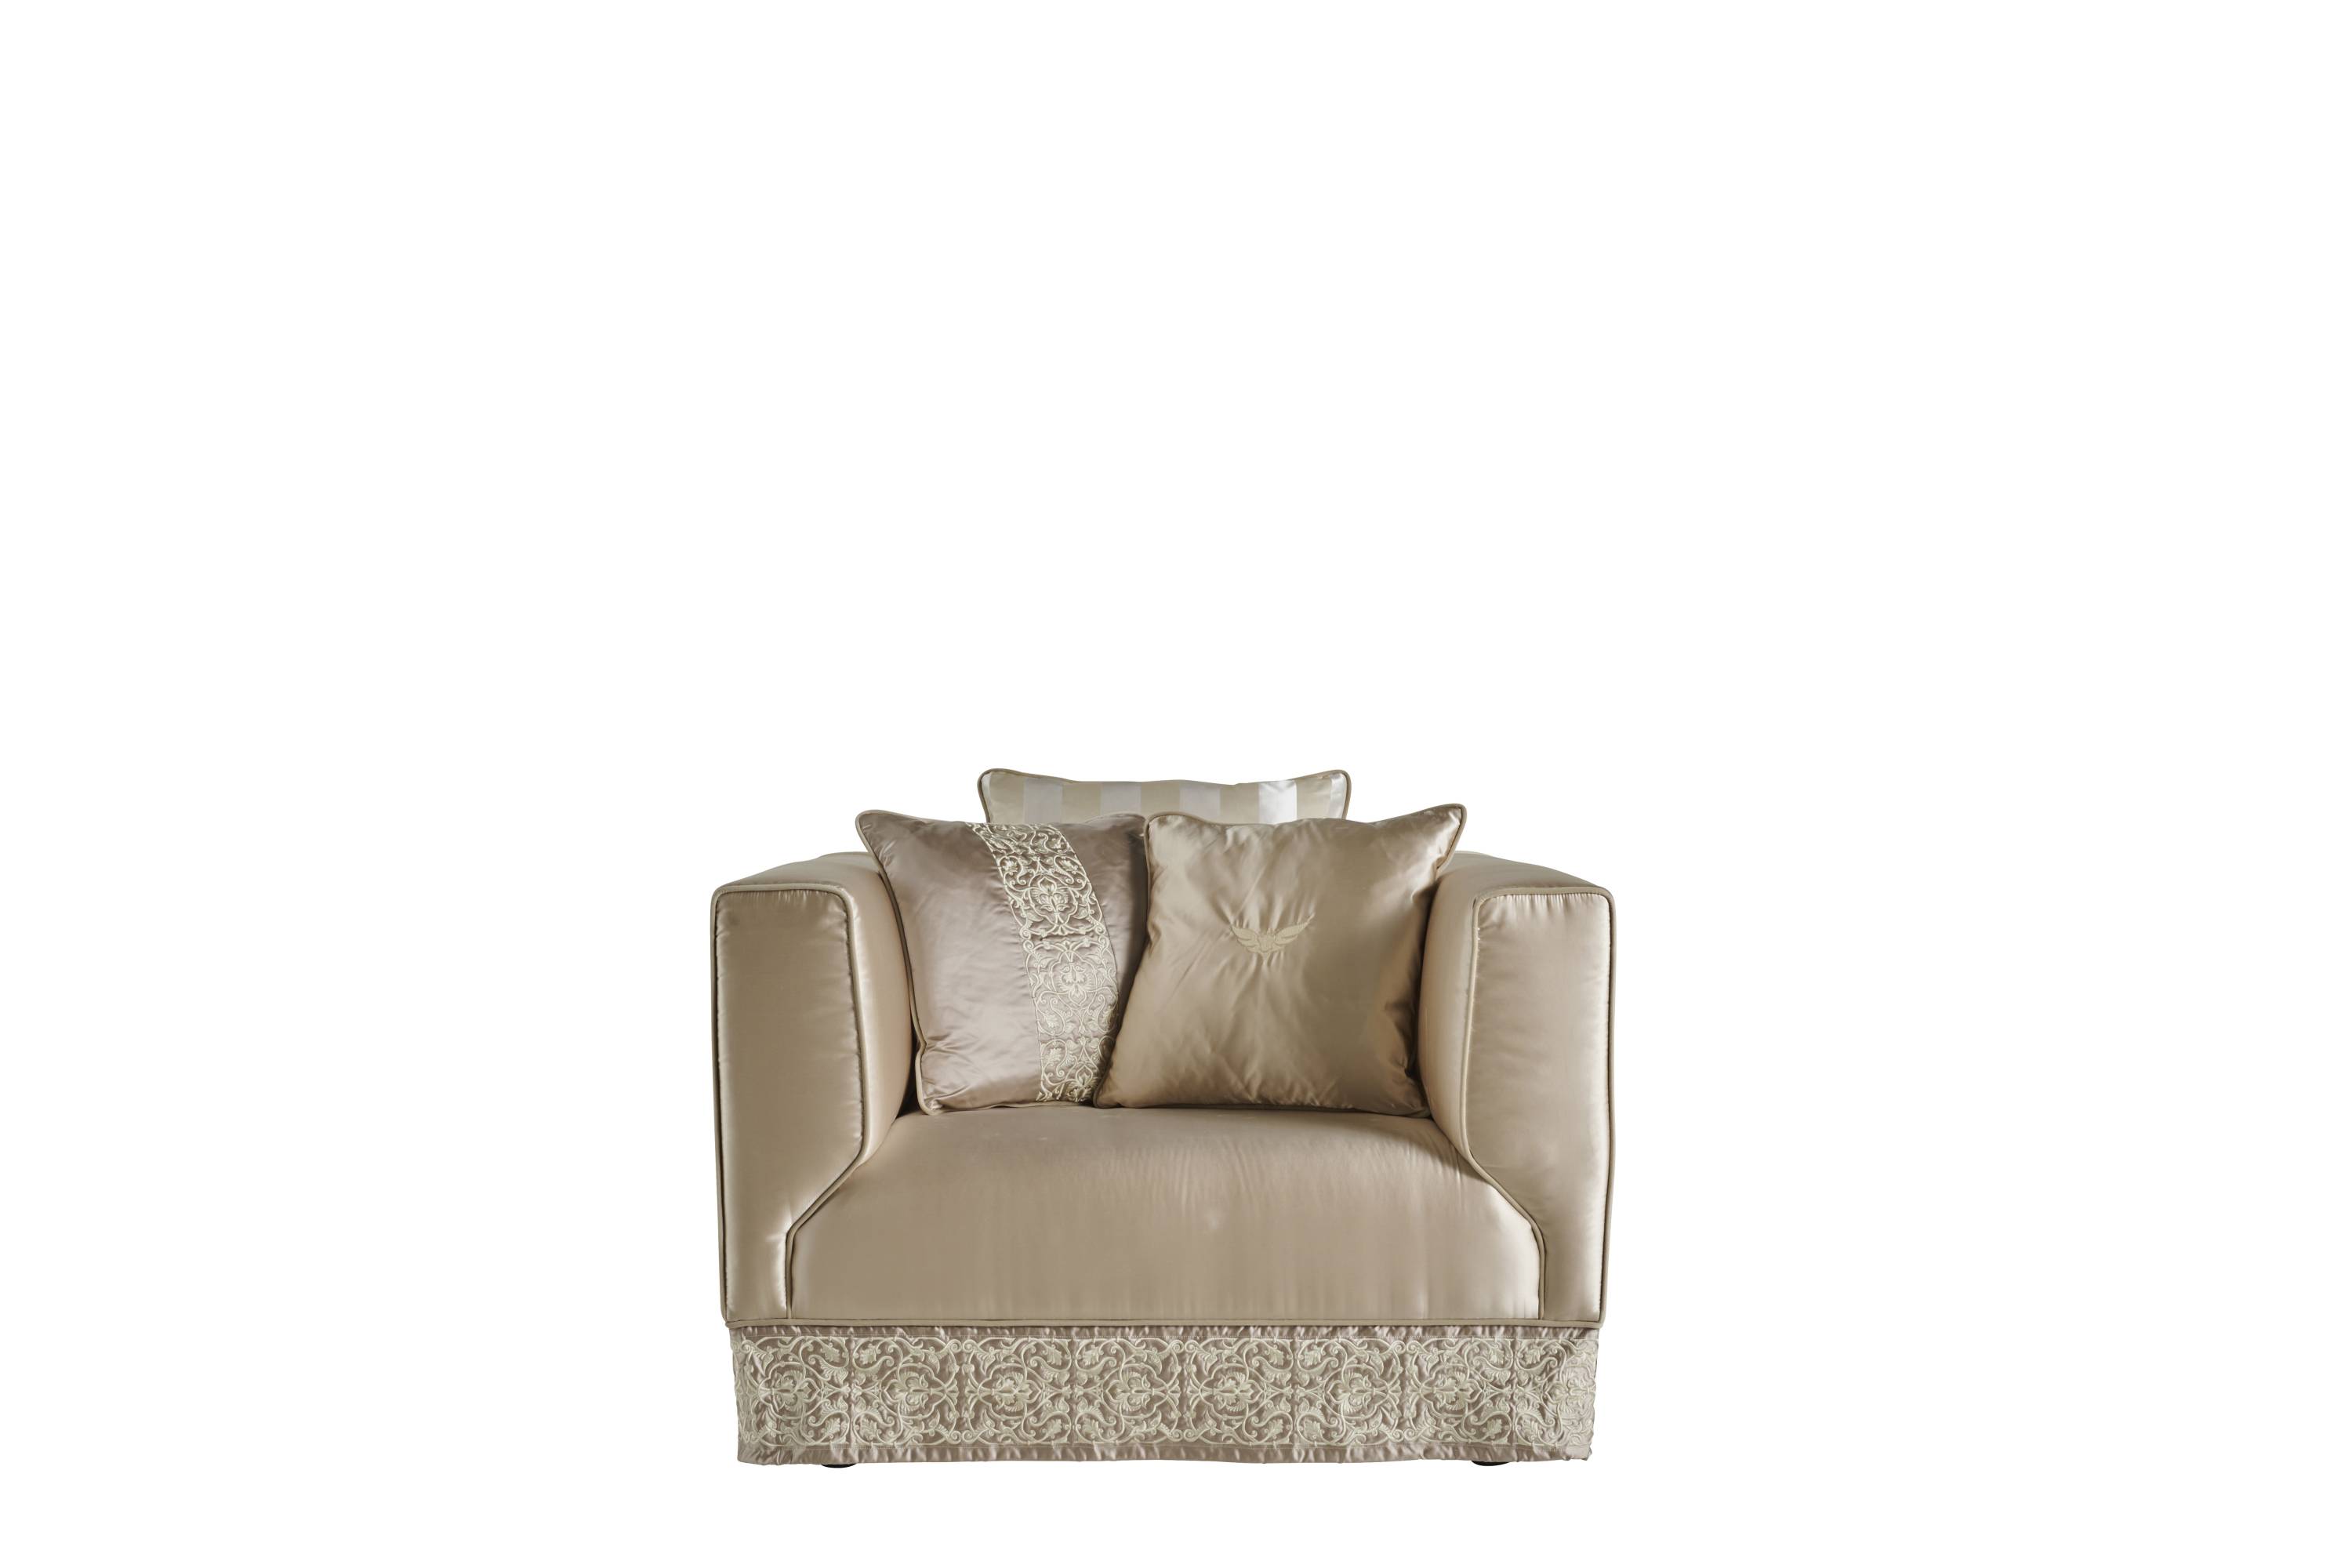 BRODERIE armchair – Transform your space with sophisticated Made in Italy classic armchairs.